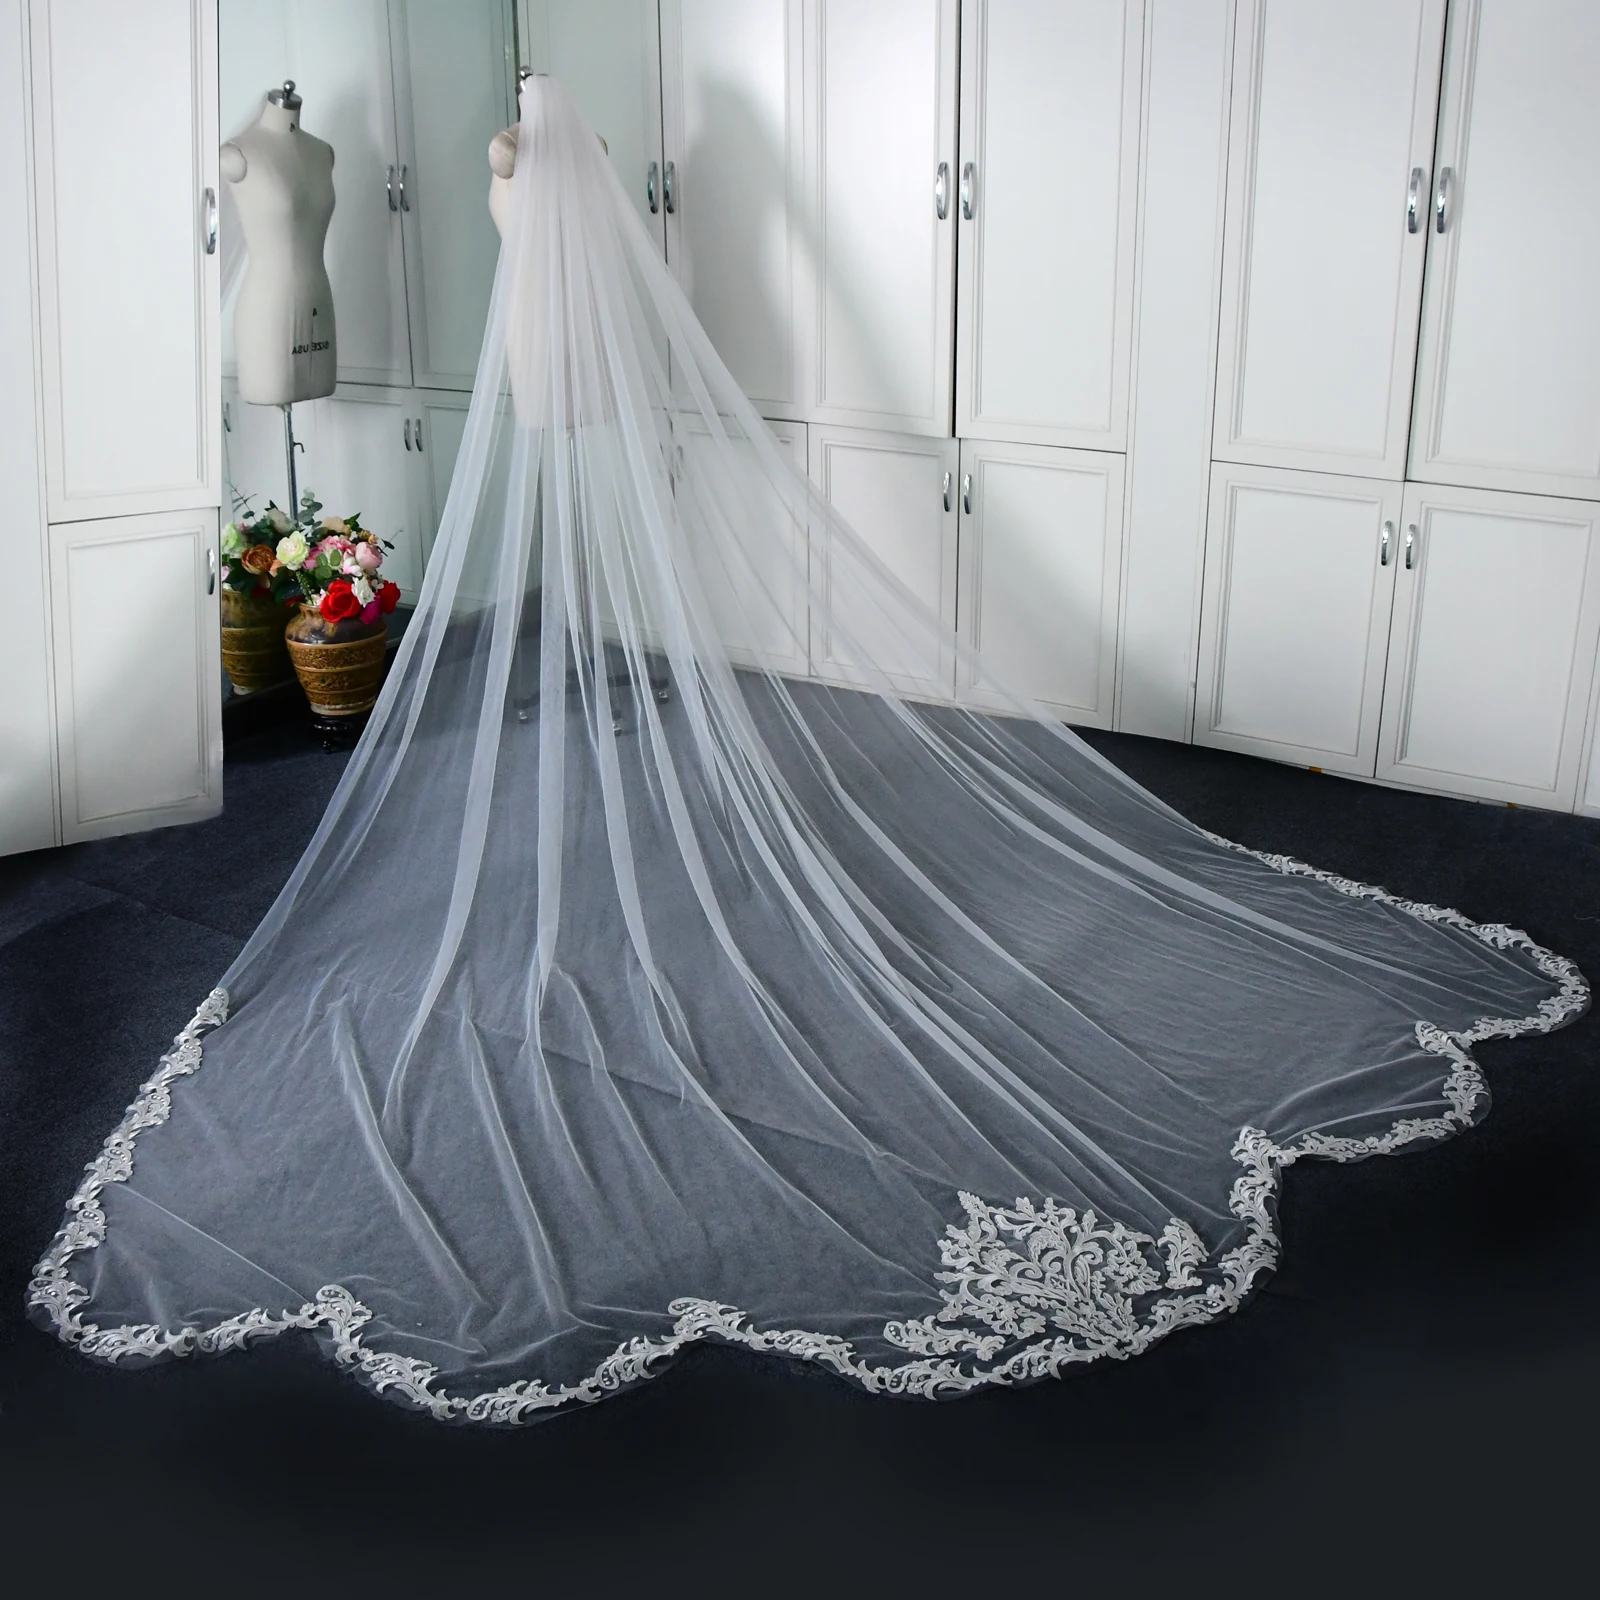 

3.5M Long Bride Veil With Comb Wedding Veils Scalloped Edge Fancy Royal Lace Trim Luxurious Cathedral Bridal Veil Head Accessory